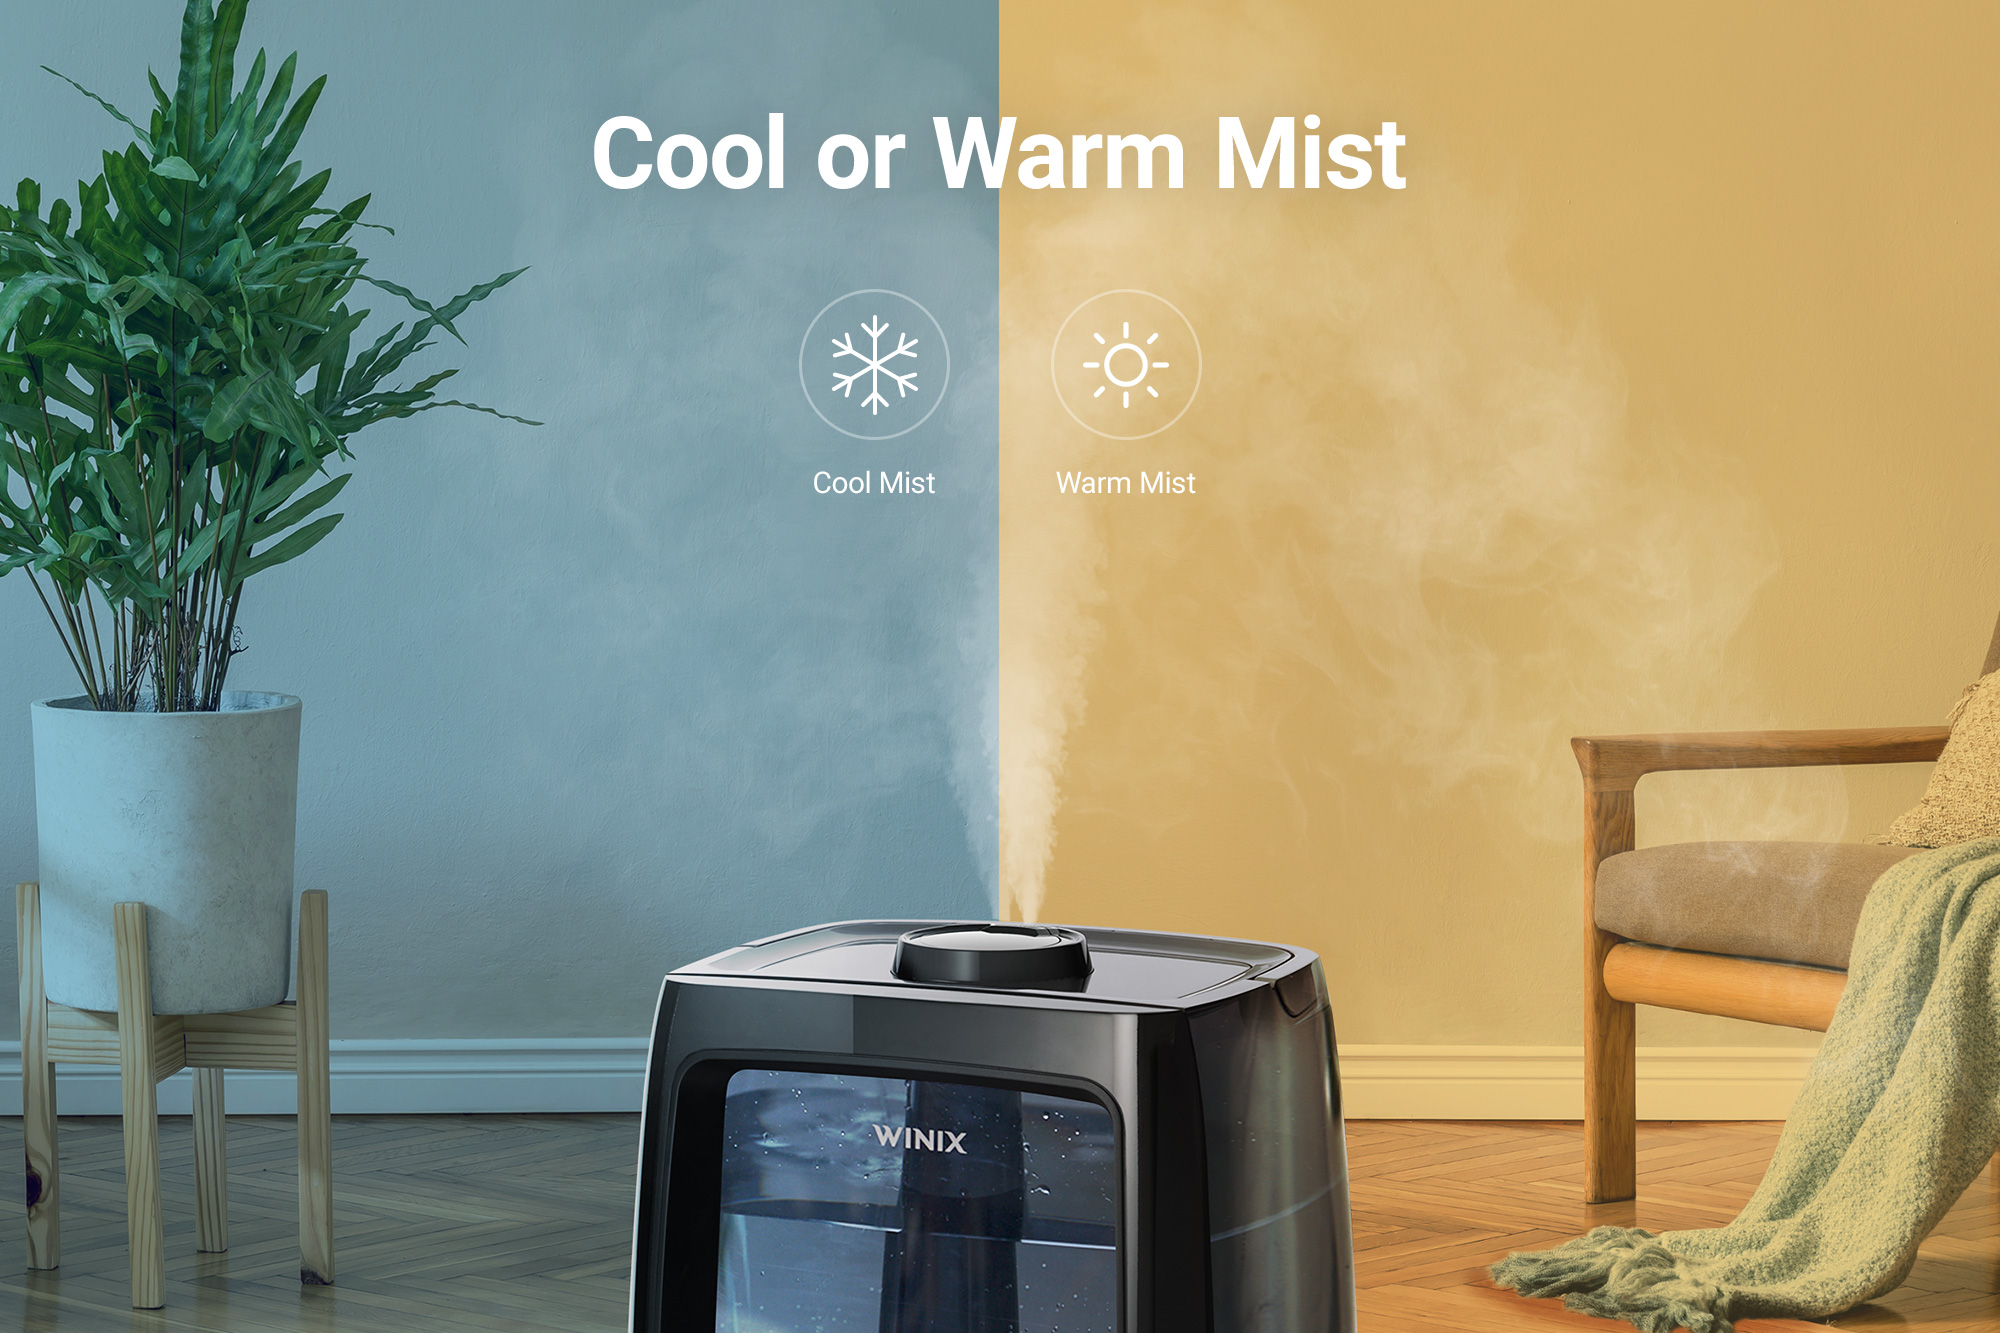 L200 humidifier split screen showing Cool or Warm Mist and text saying Cool or Warm Mist